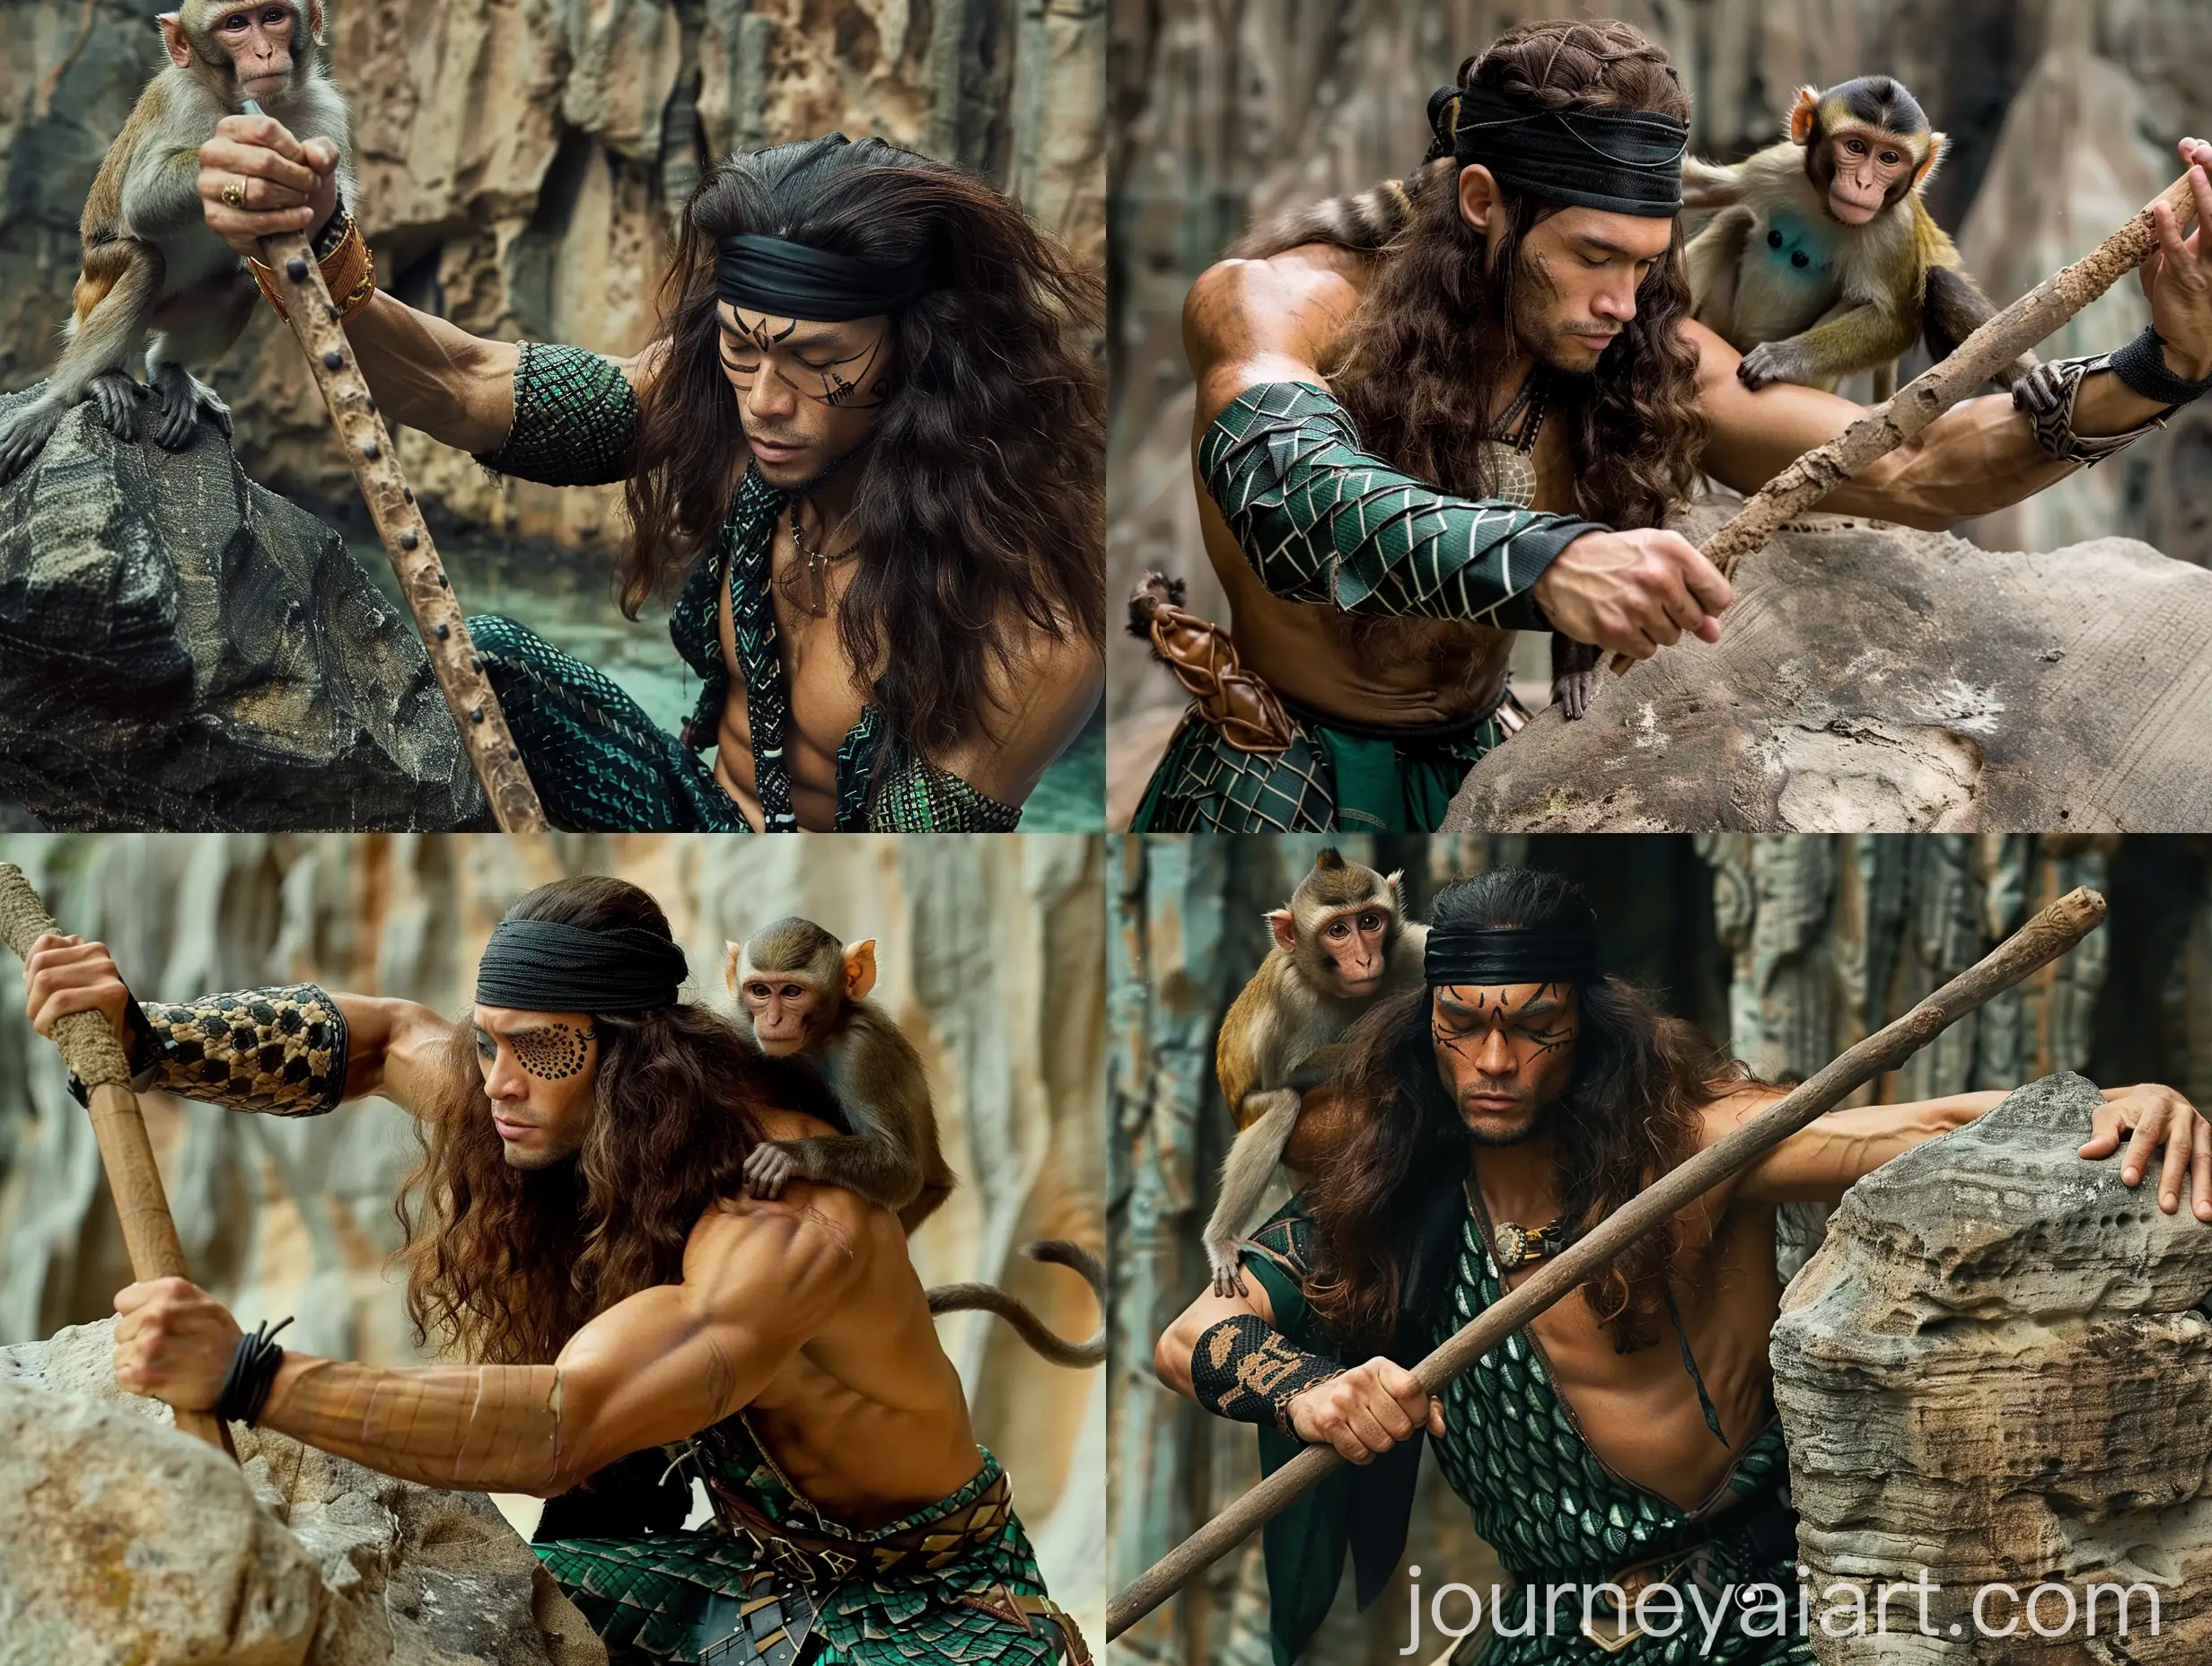 Indonesian-Male-Warrior-with-Sleeping-Blind-Eyes-Strikes-Rock-with-Wooden-Stick